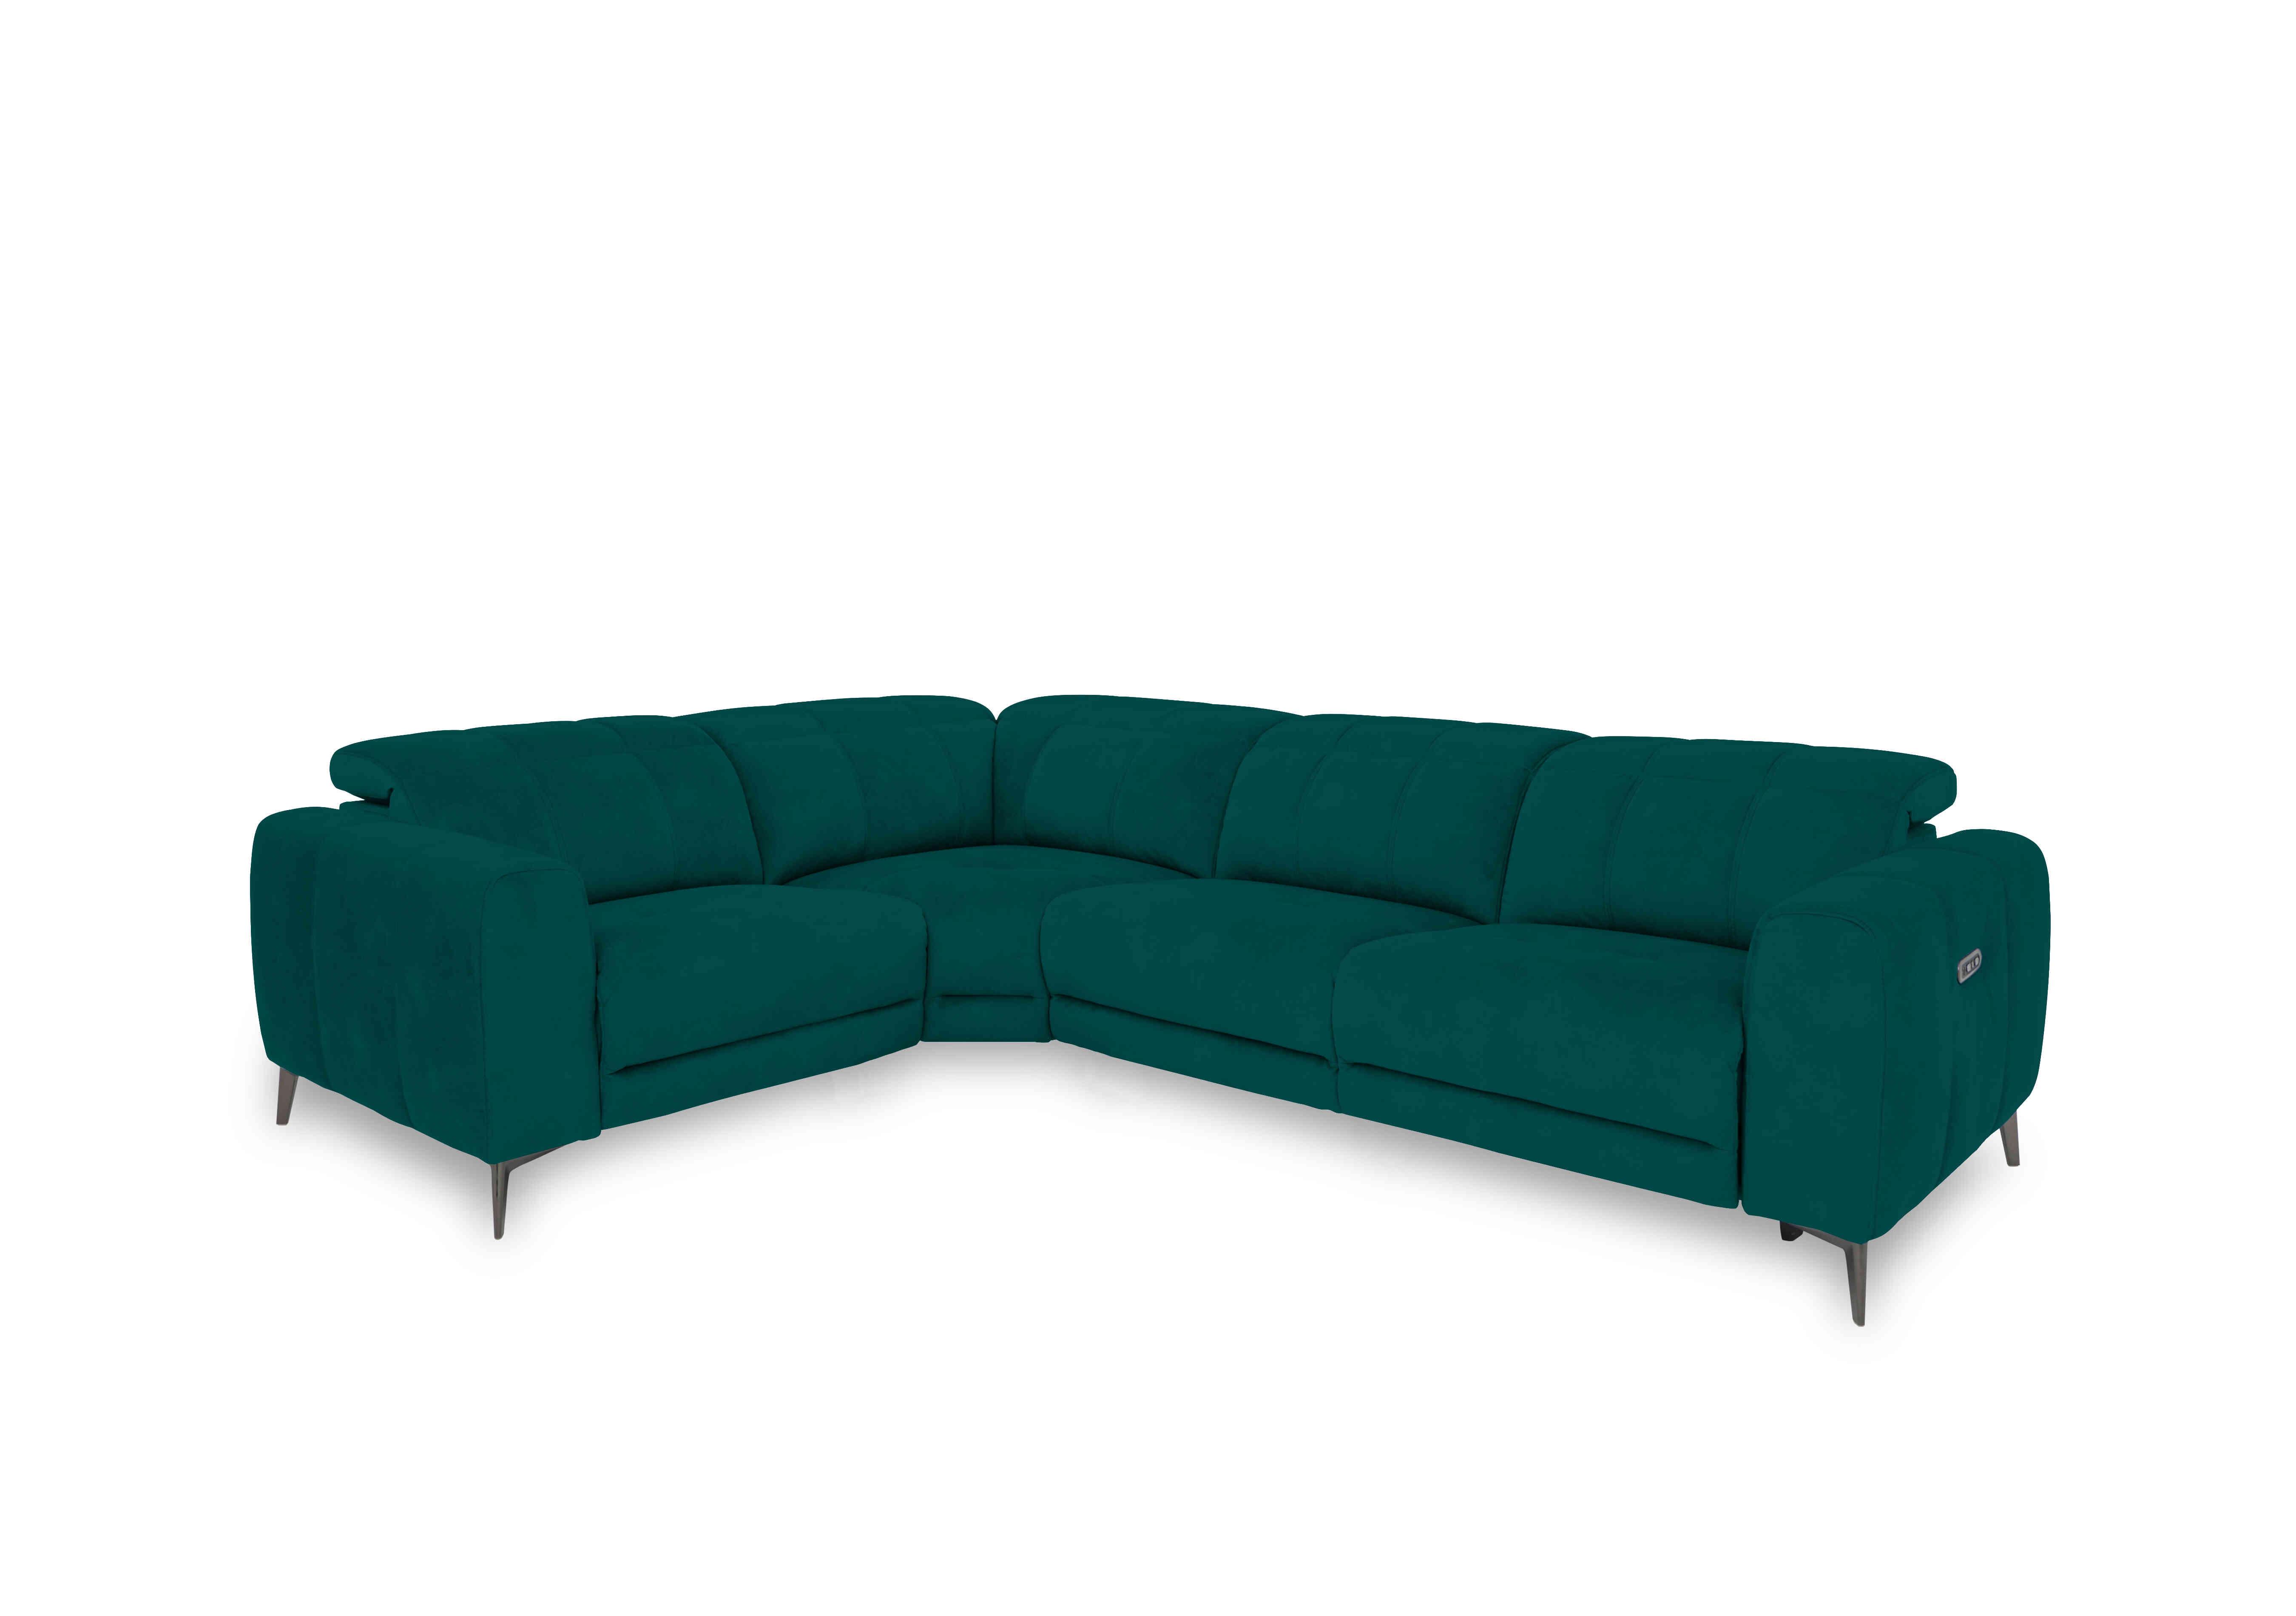 Ezra Fabric Power Recliner Corner Sofa with Power Headrests in Opulence 51003 Teal on Furniture Village